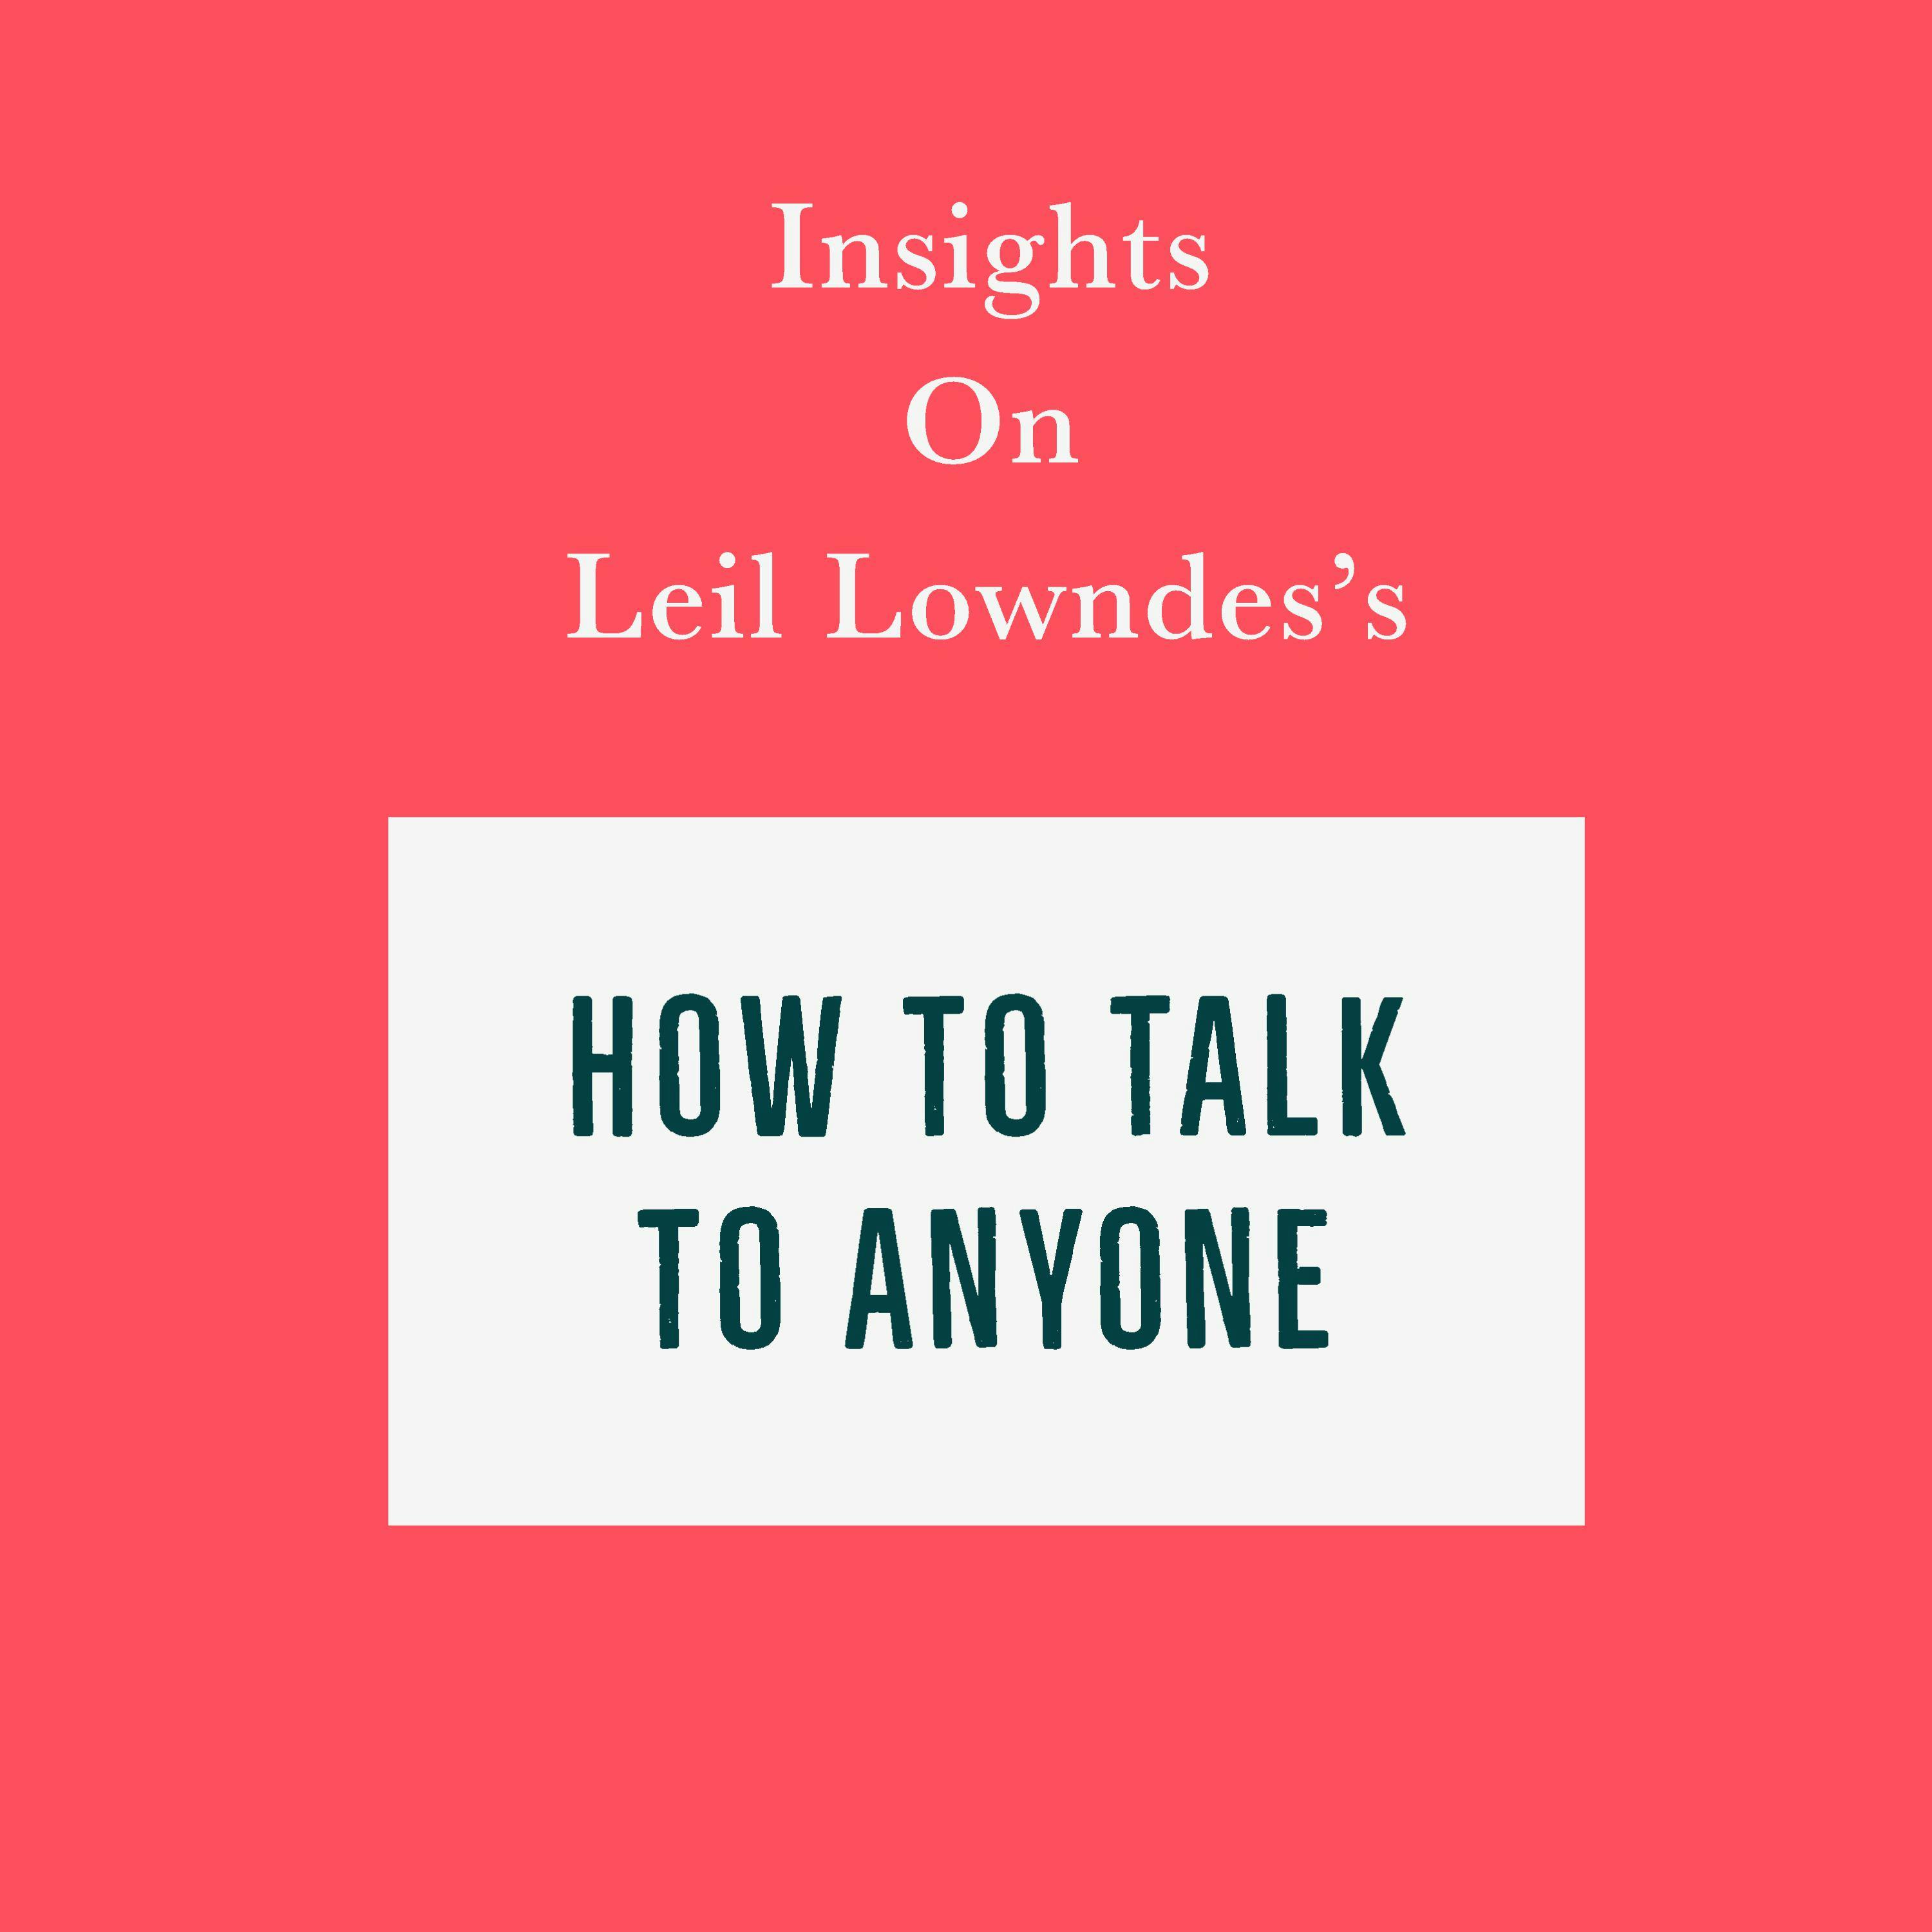 Insights on Leil Lowndes’s How to Talk to Anyone - undefined